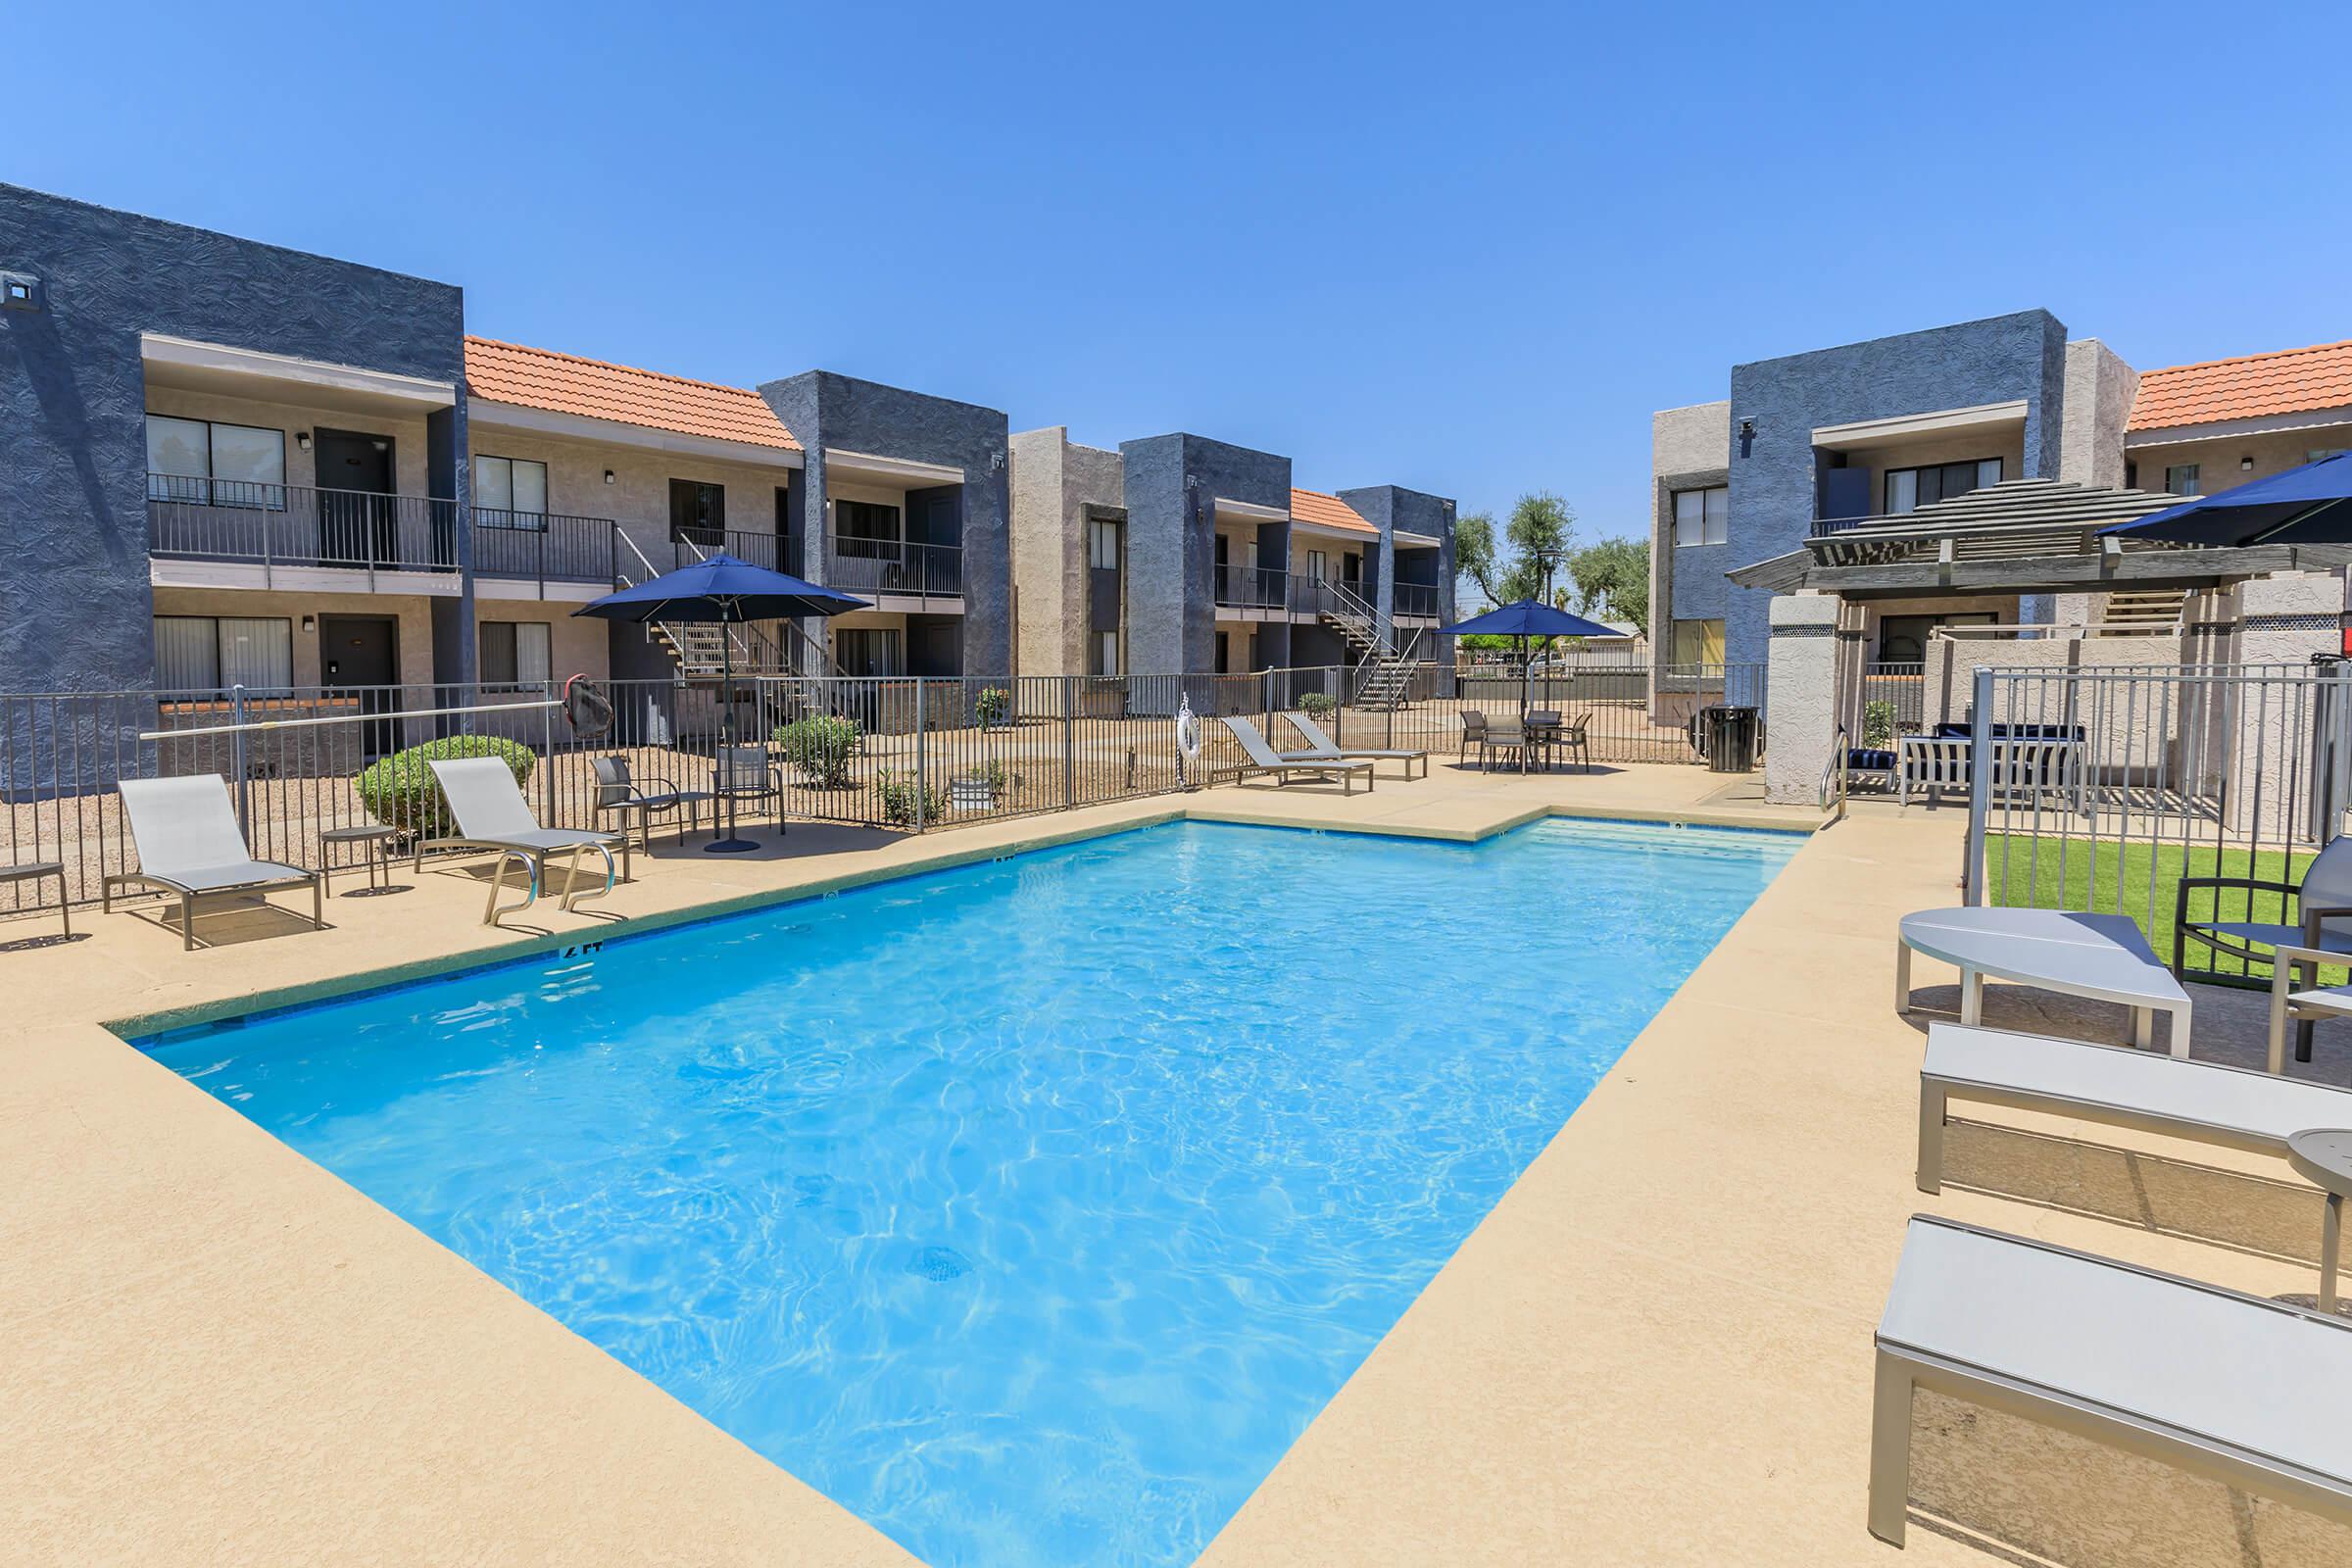 Large blue outdoor swimming pool surrounded by pool chairs and Phoenix apartments for rent